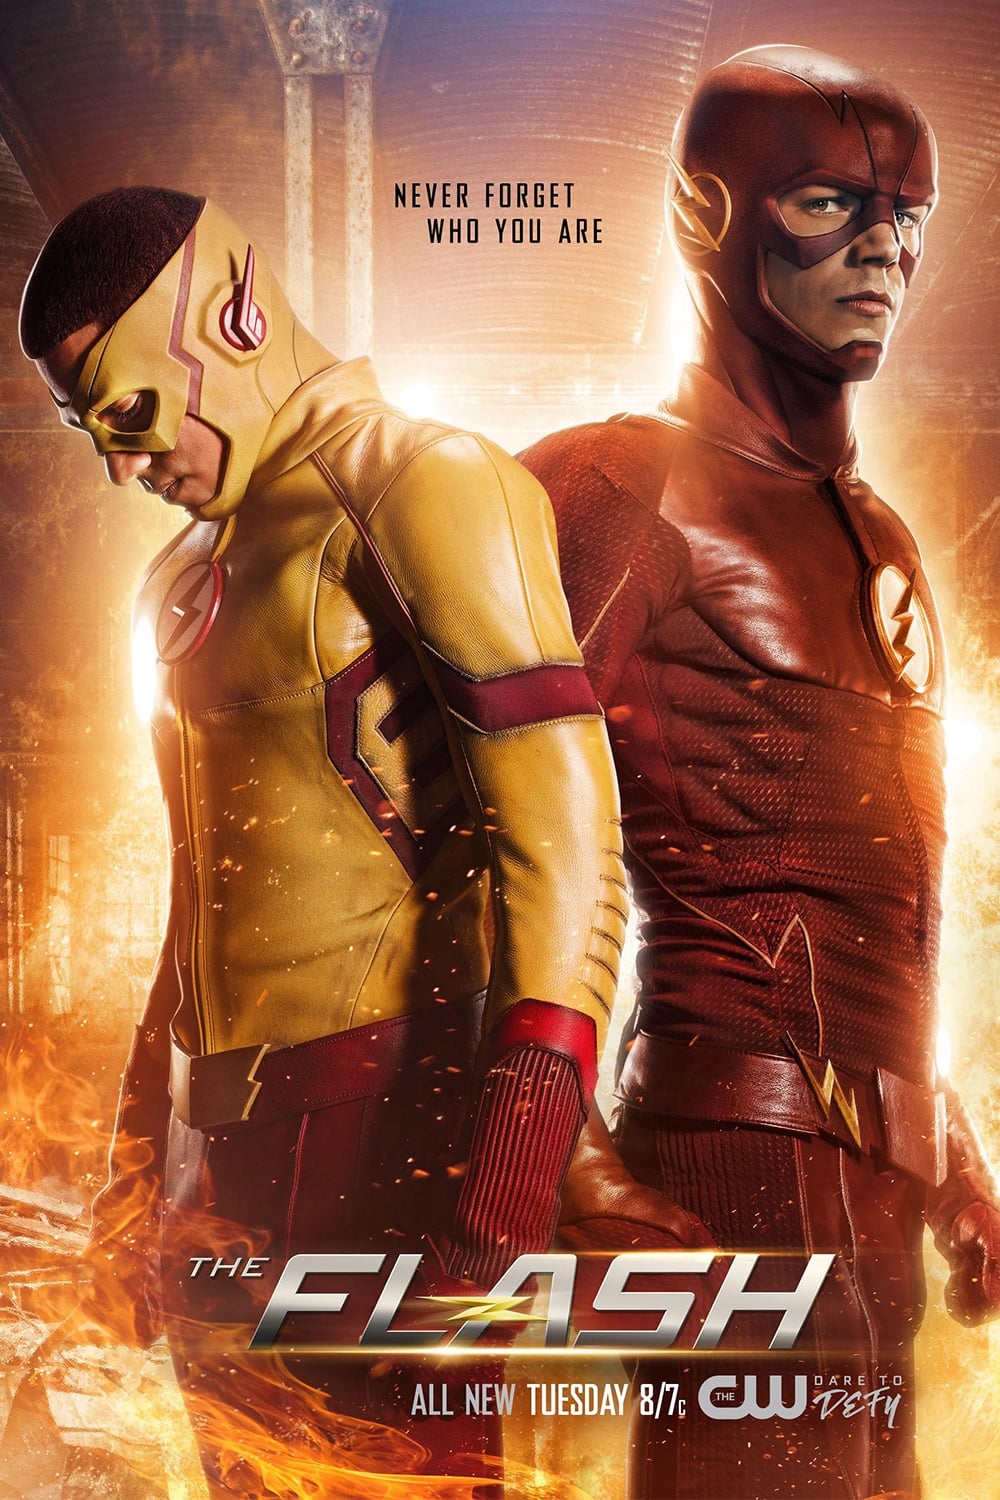 the flash reviews movie Flash movie flashpoint trailer cast date